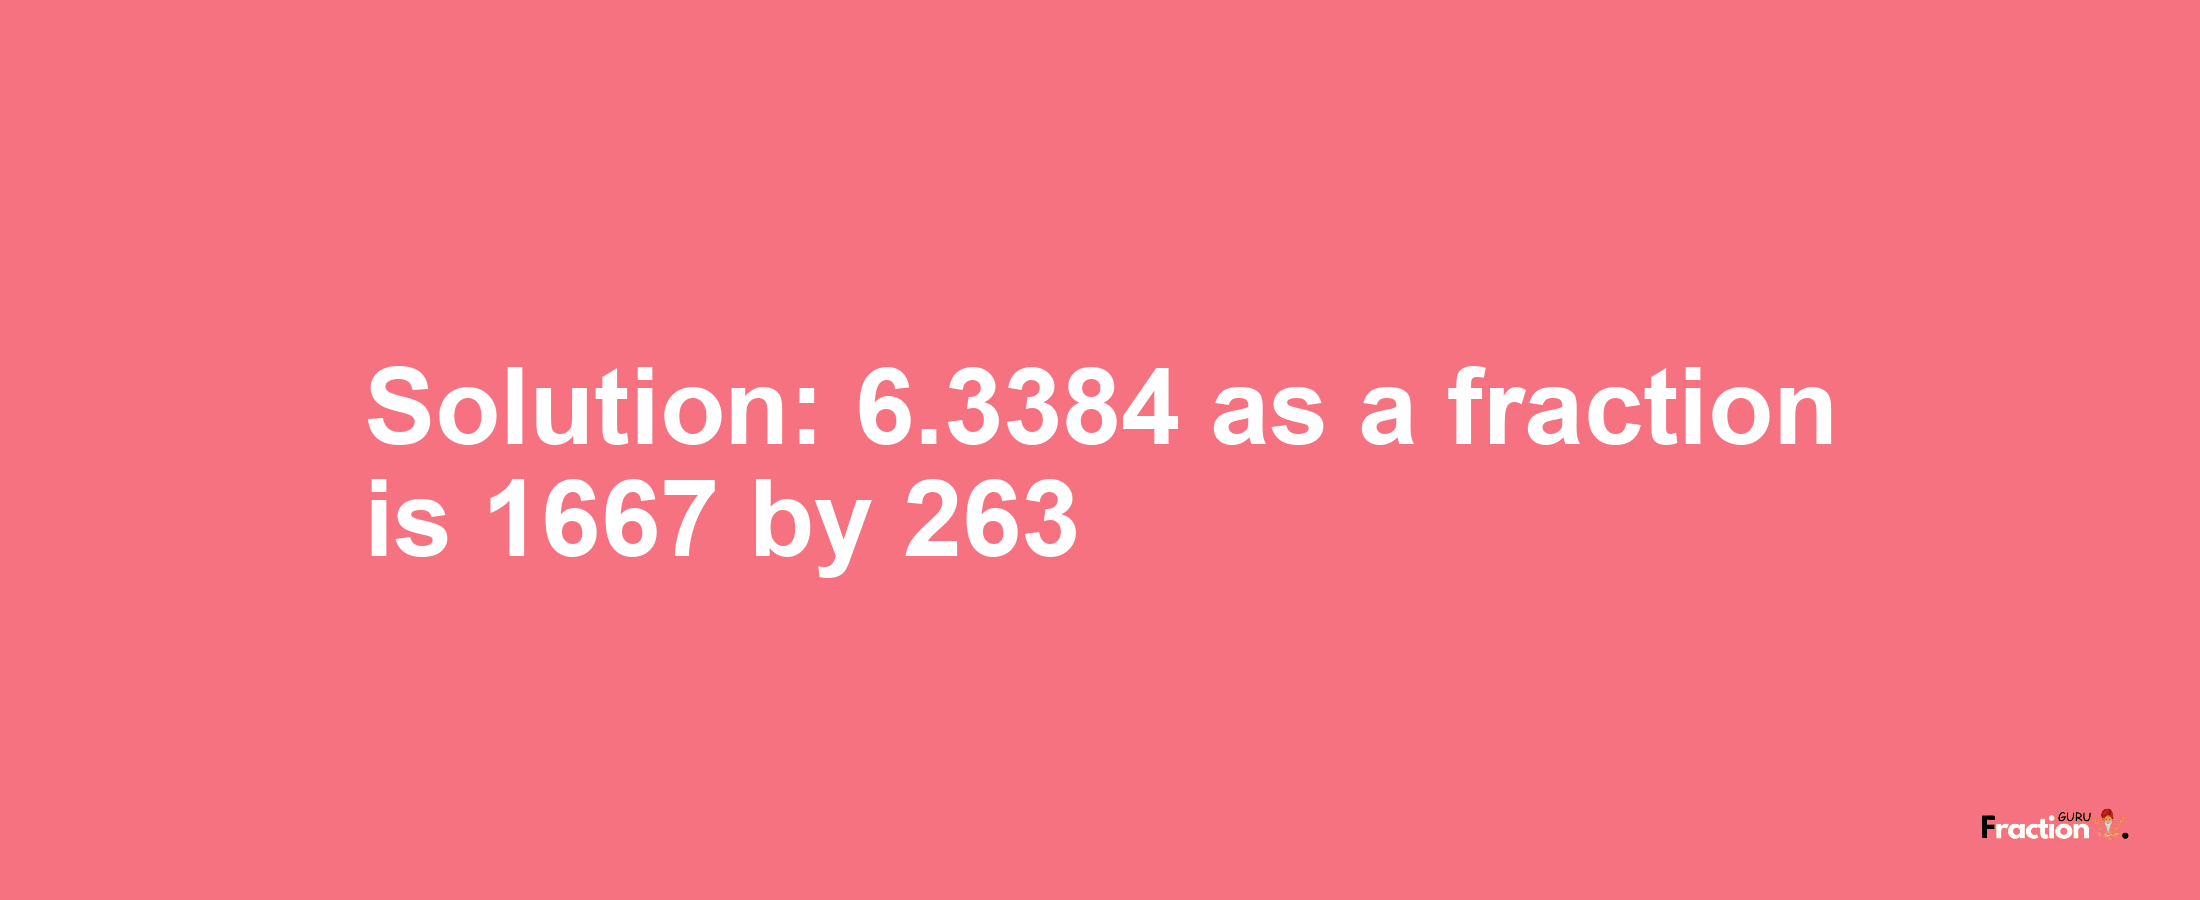 Solution:6.3384 as a fraction is 1667/263